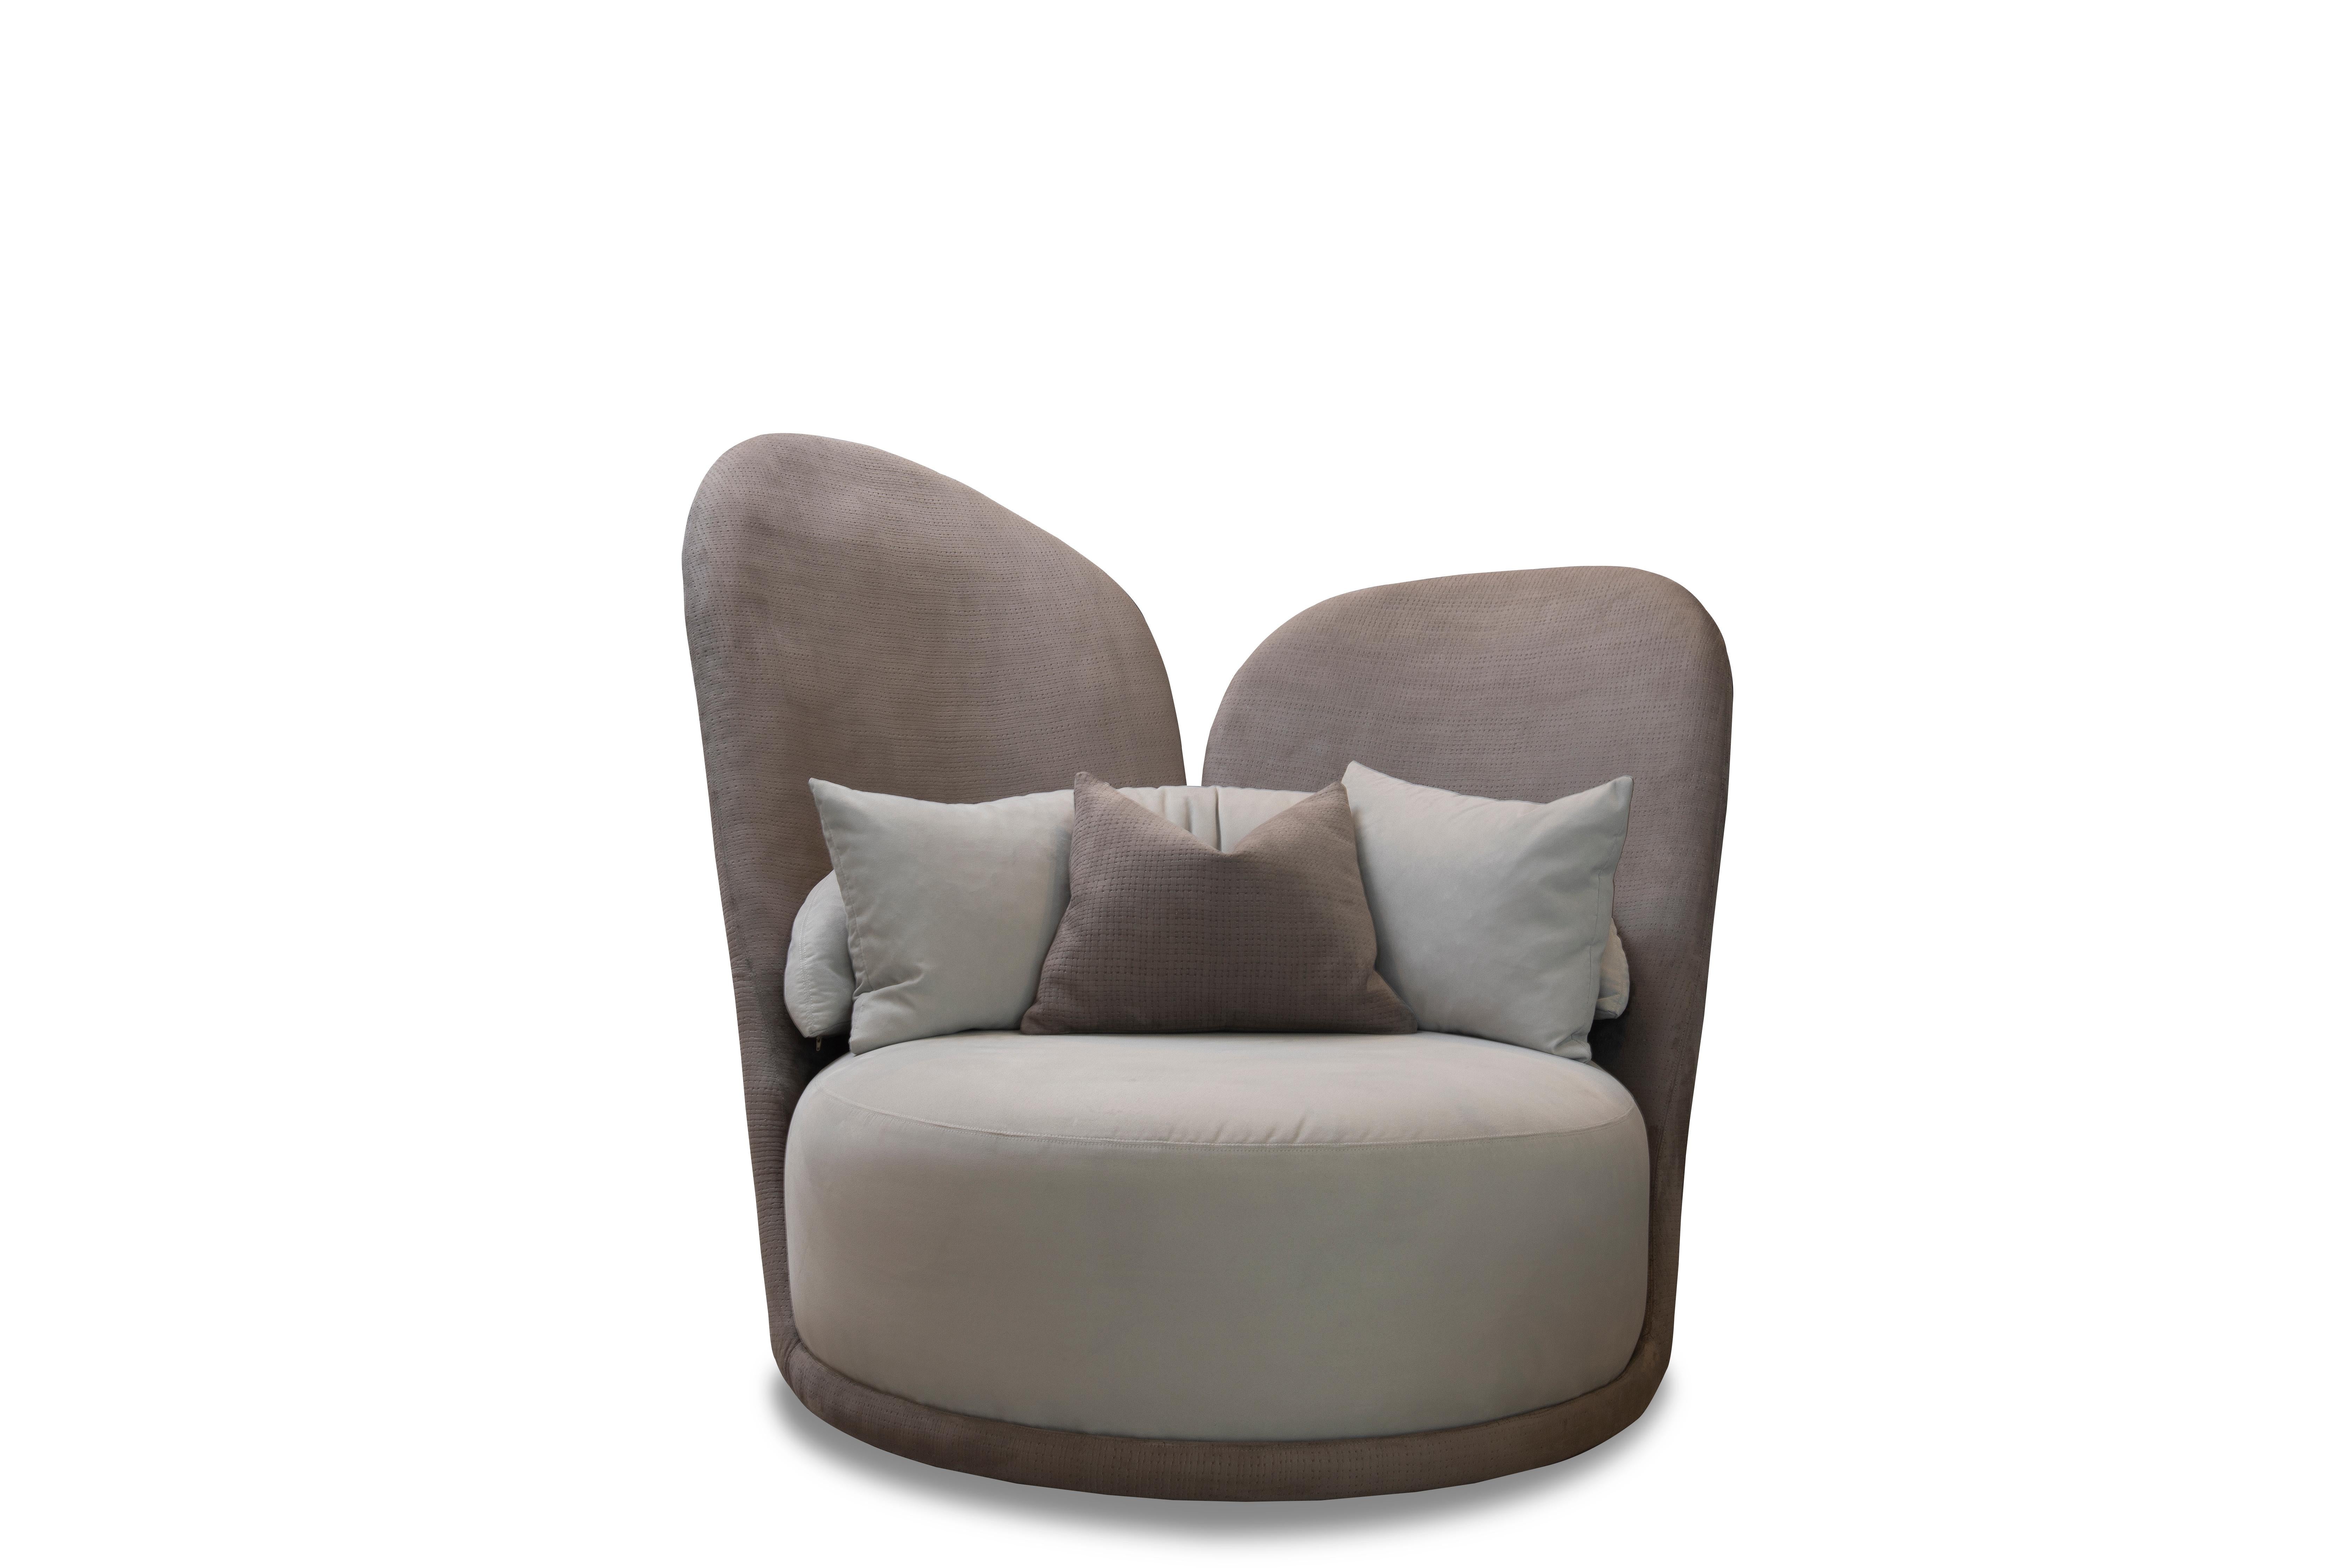 COCÓ is the fusion of armchair and sofa with an extra high iconic back and a large comfortable seating area. The unique shape invites you to retreat into your cozy private world – cuddle up with a good book or your love. 

As shown Body: Lux